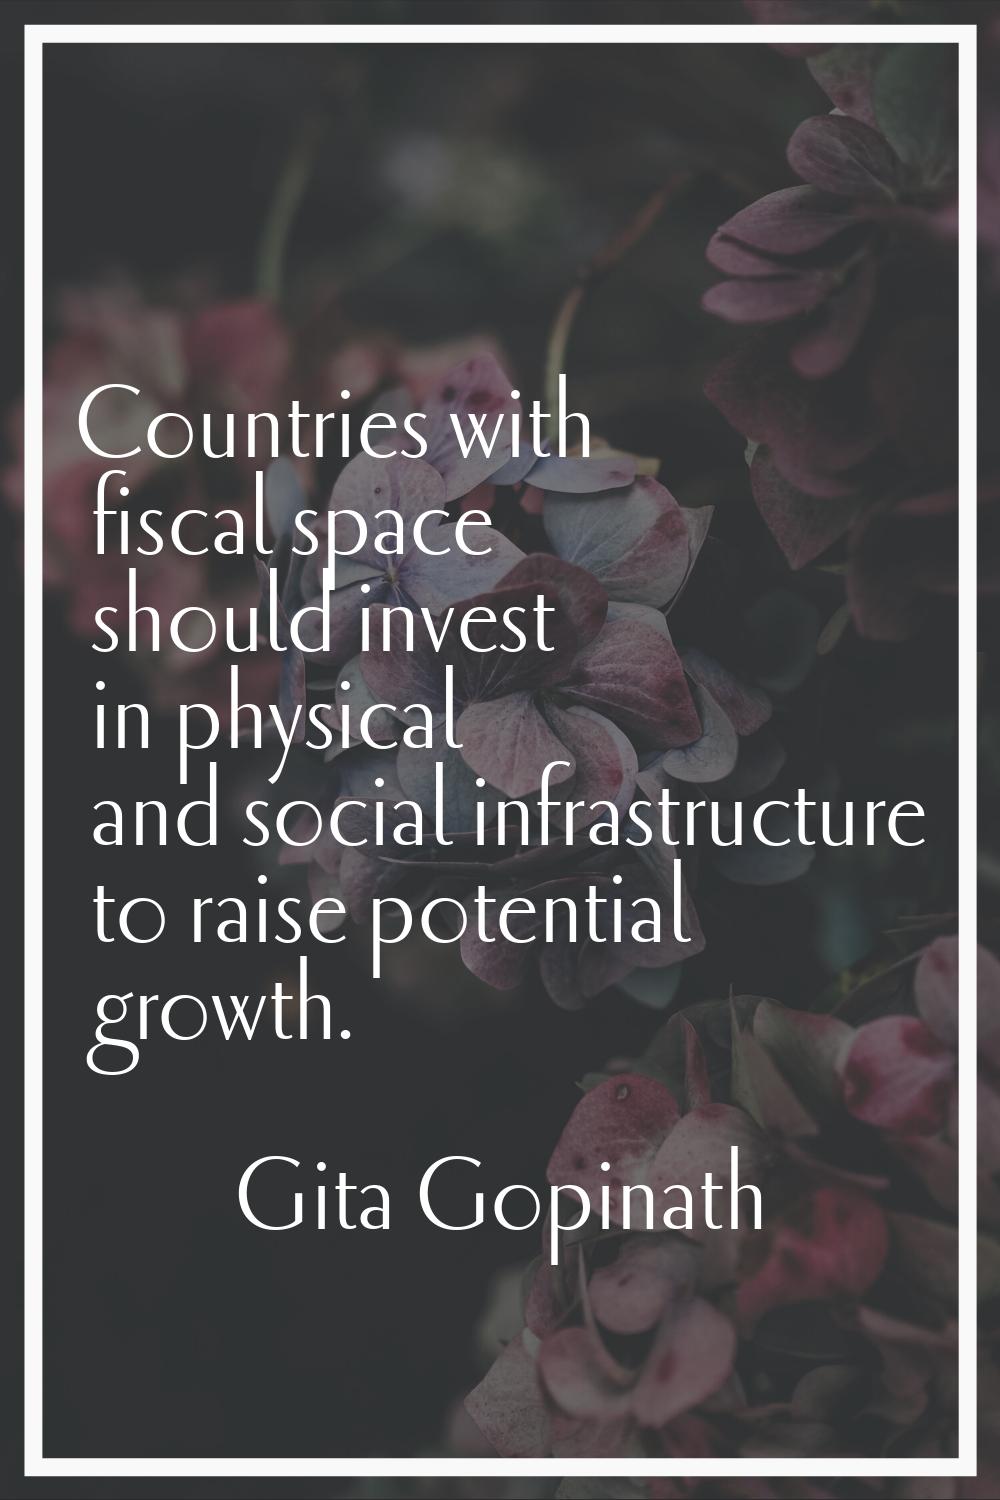 Countries with fiscal space should invest in physical and social infrastructure to raise potential 